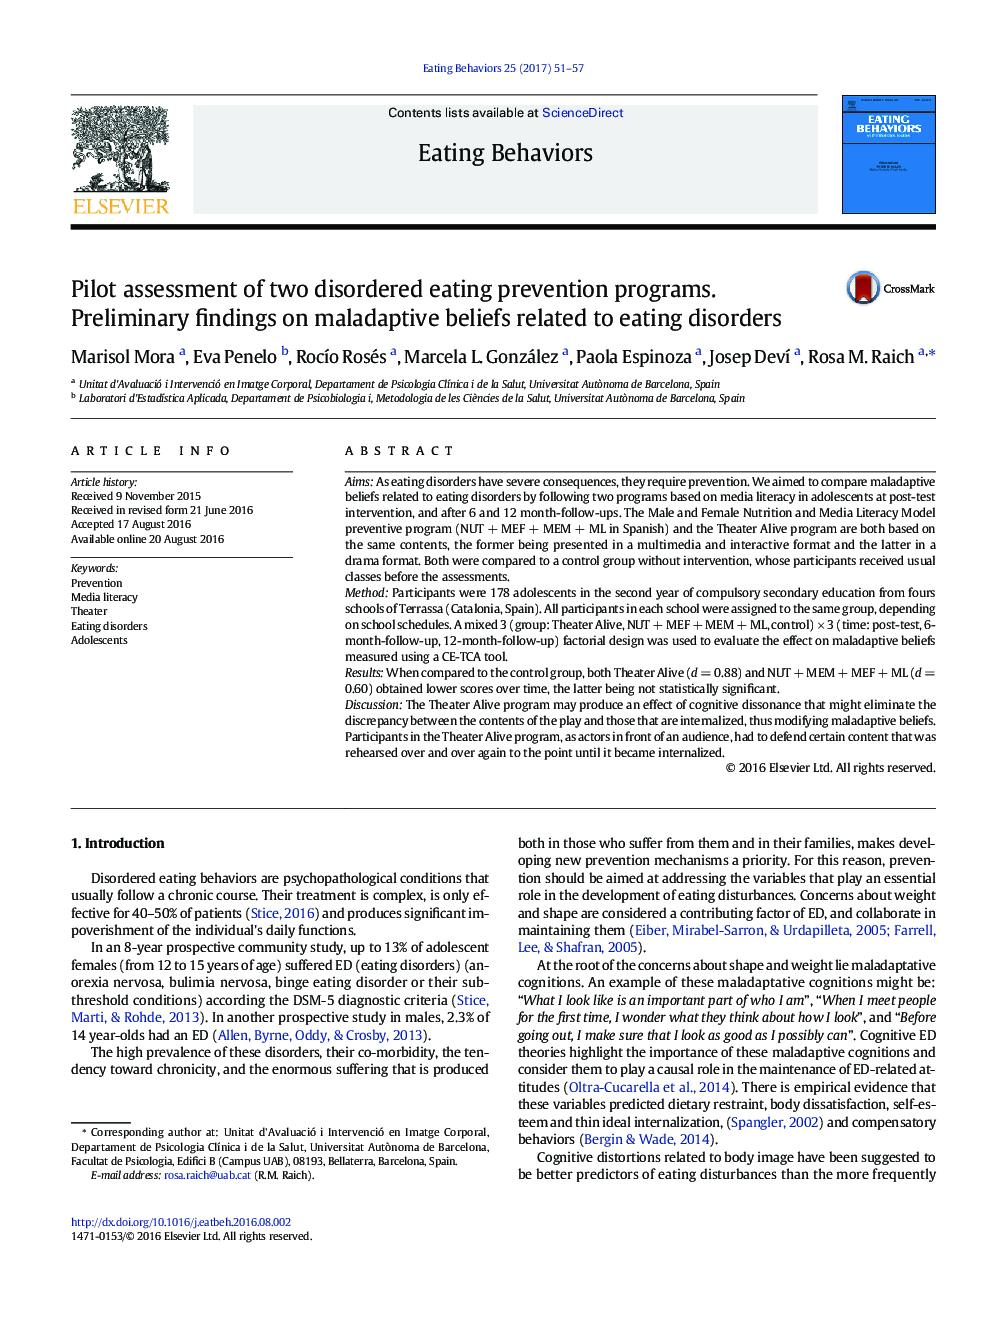 Pilot assessment of two disordered eating prevention programs. Preliminary findings on maladaptive beliefs related to eating disorders